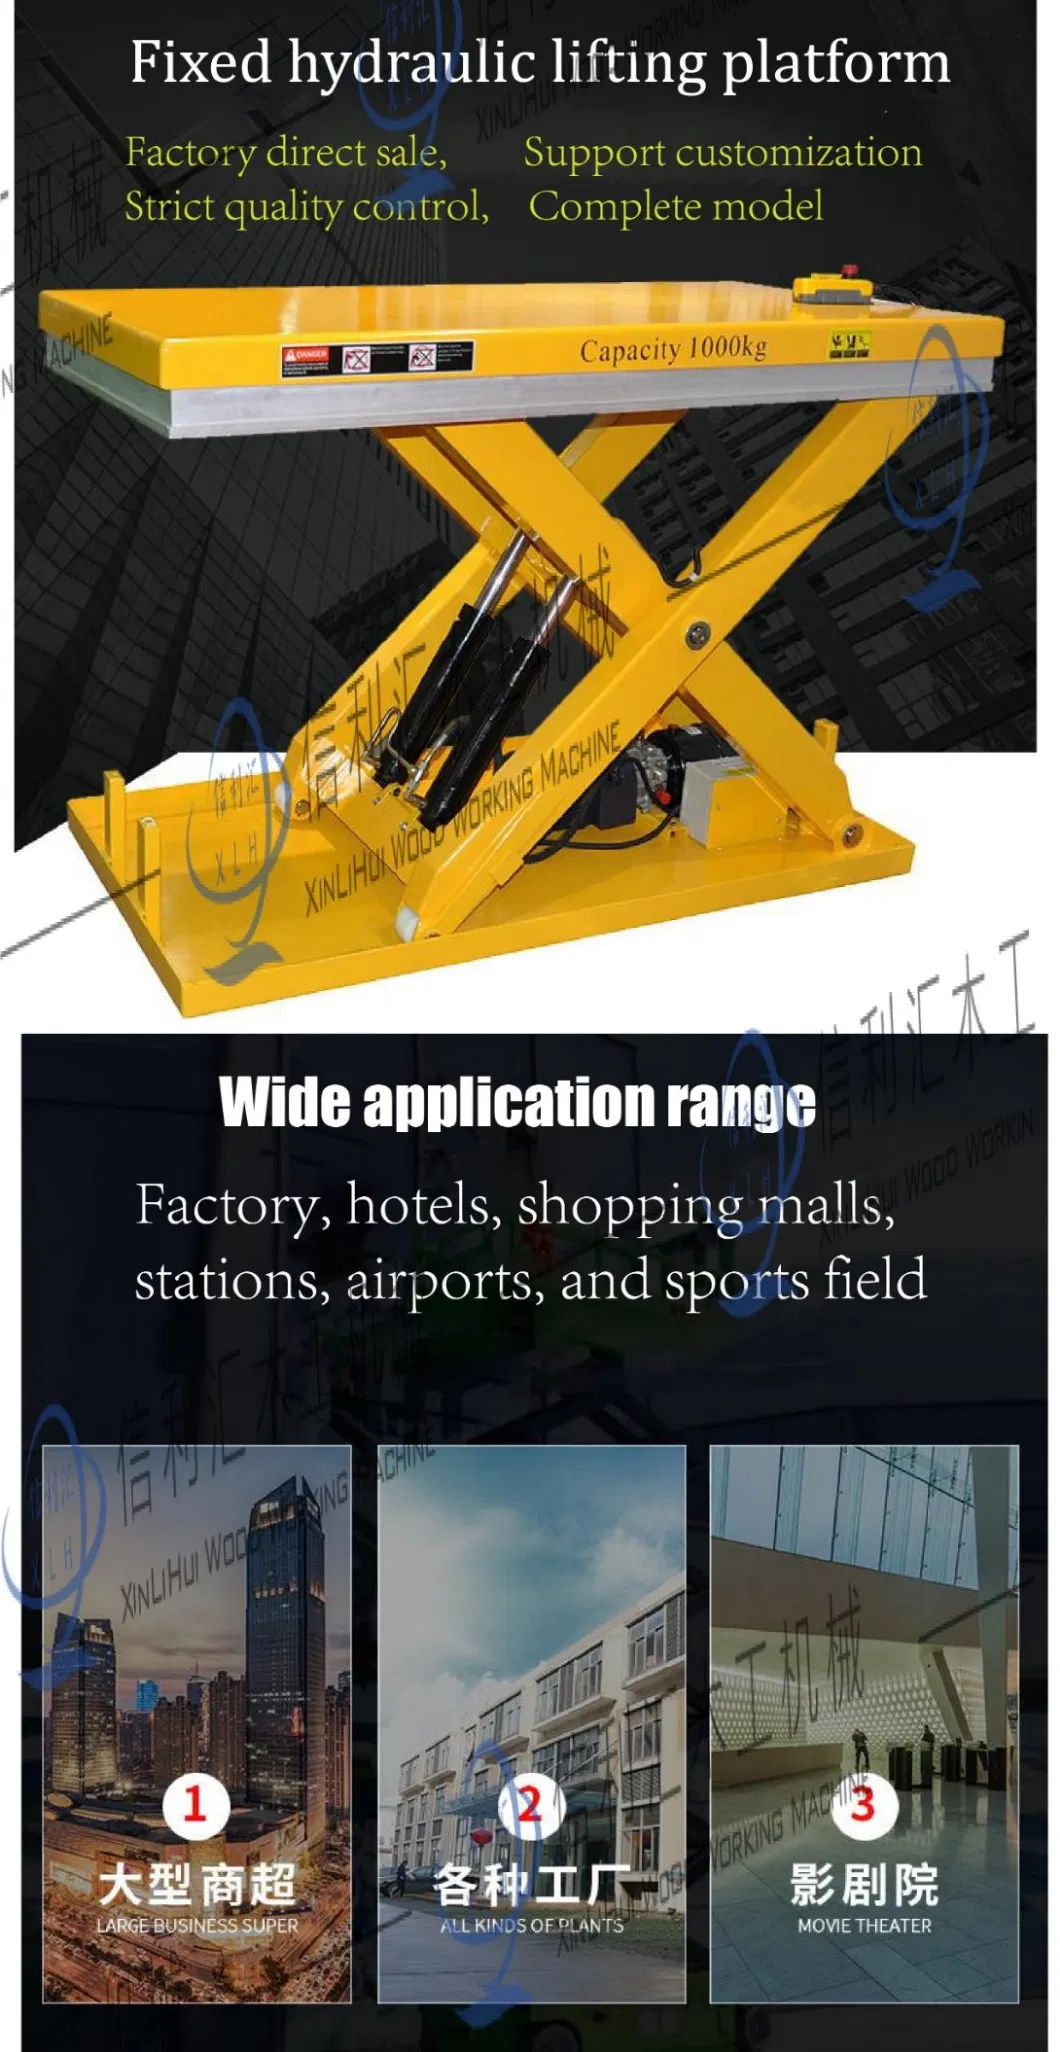 Automatic Hydraulic High Altitude 8 M 10 M Work Car Mobile Scissor Lift Self-Propelled Electric Lifting Working Platform Lifting Equipment